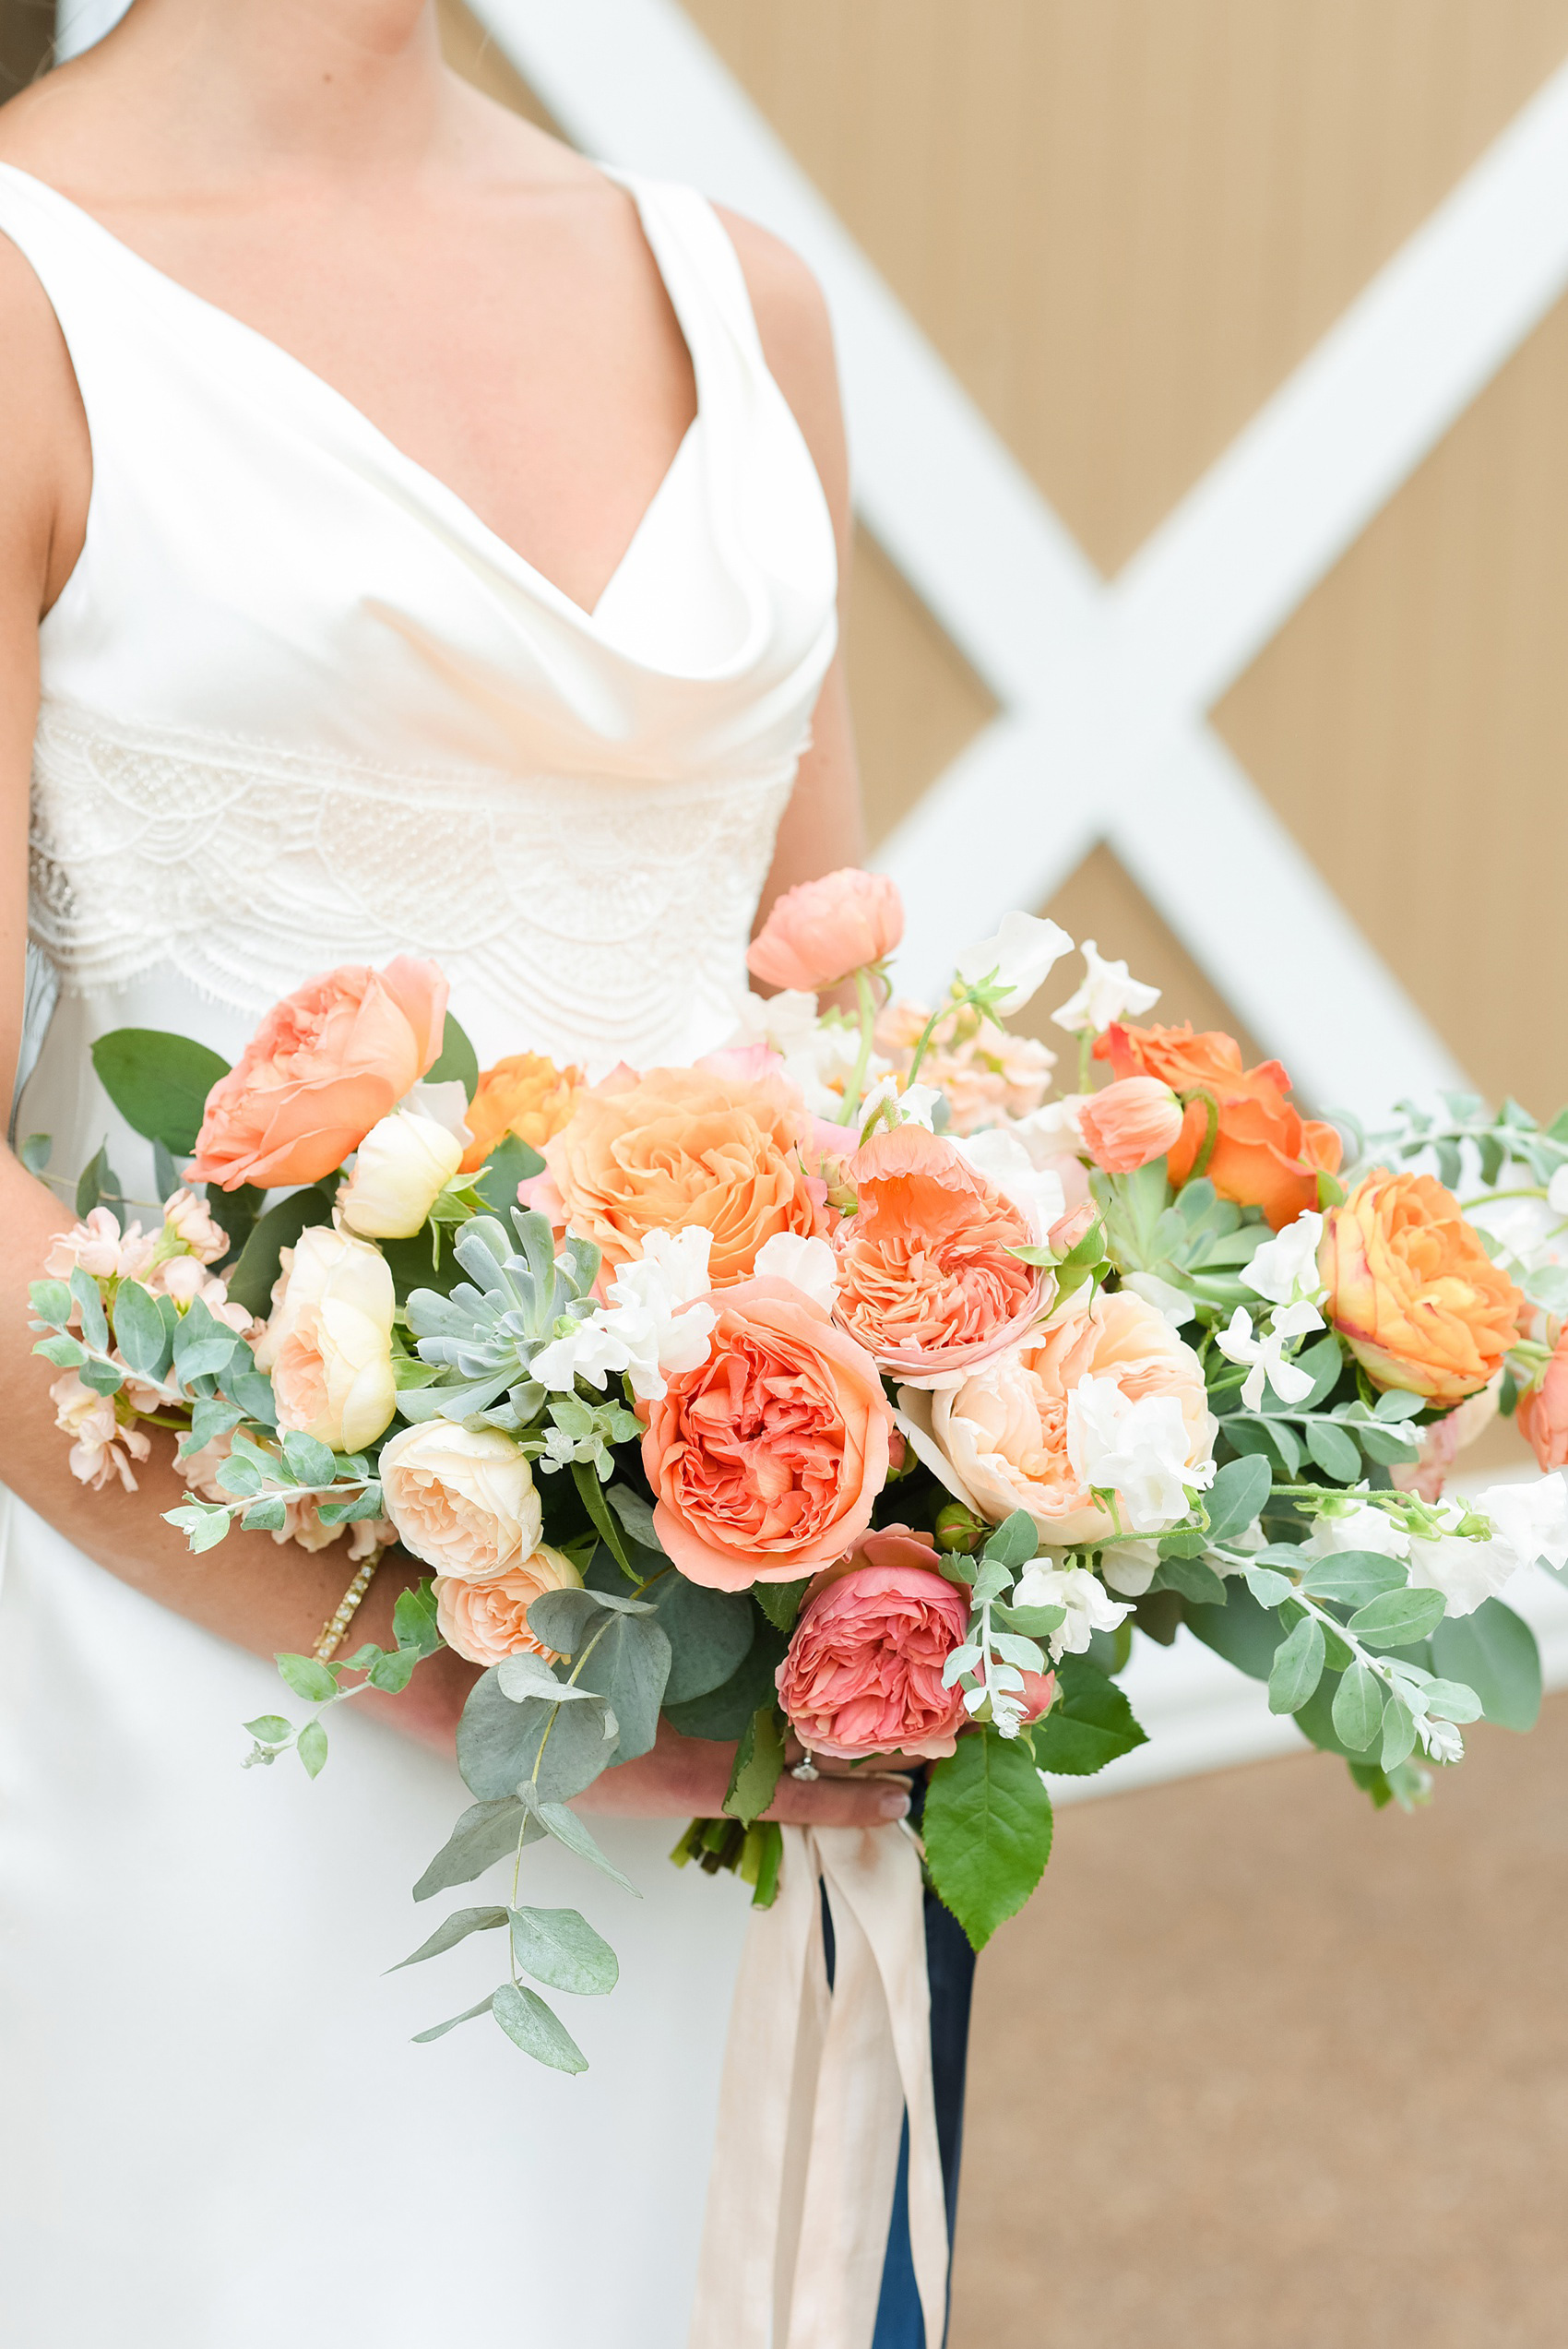 Charlottesville wedding photos by Mikkel Paige Photography. This Virginia venue is perfect for brides and grooms looking for a beautiful farm reception space. It’s green, romantic, and easy to dress up with flowers or keep simple. The bouquets were tied with long navy blue, peach and light pink ribbons and contained colorful flowers like garden roses, peonies, ranunculus and succulents. Click through for the complete post from this May event at the Lodge at Mount Ida Farm! Planning and design by @vivalevent and flowers by @apassarelli of Meristem Floral. #Charlottesville #mountidafarm #lodgeatmountida #CharlottesvilleVA #CharlottesvilleVirginia #Charlottesvillewedding #Charlottesvilleweddingphotographer #mikkelpaige #MeristemFloral #VivaLEvent